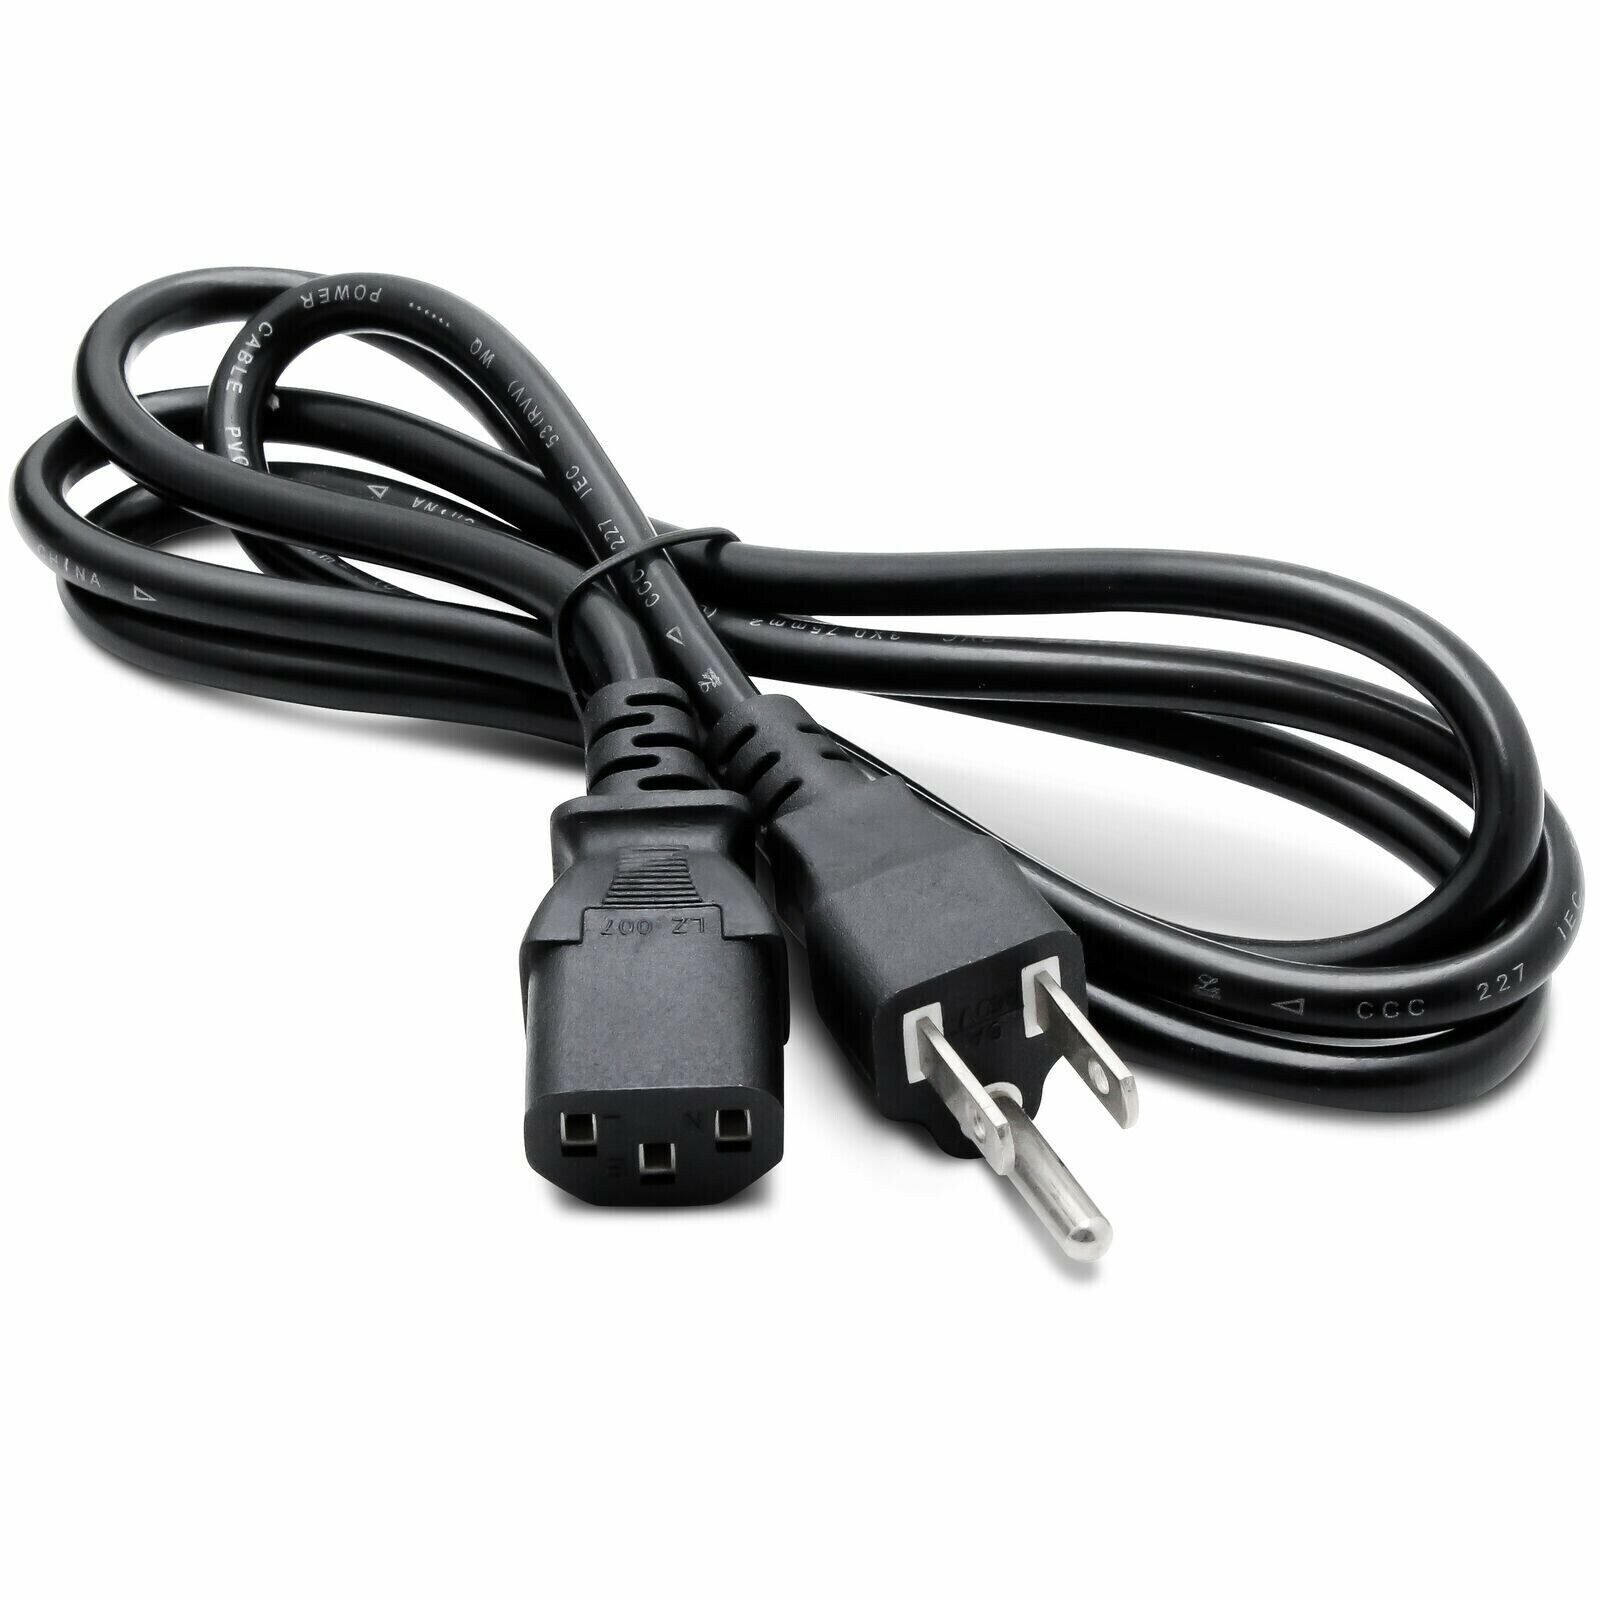 5ft ETL AC Power Cord Cable Lead For Dometic Refrigerator AC-20A CFX CRX Cooler